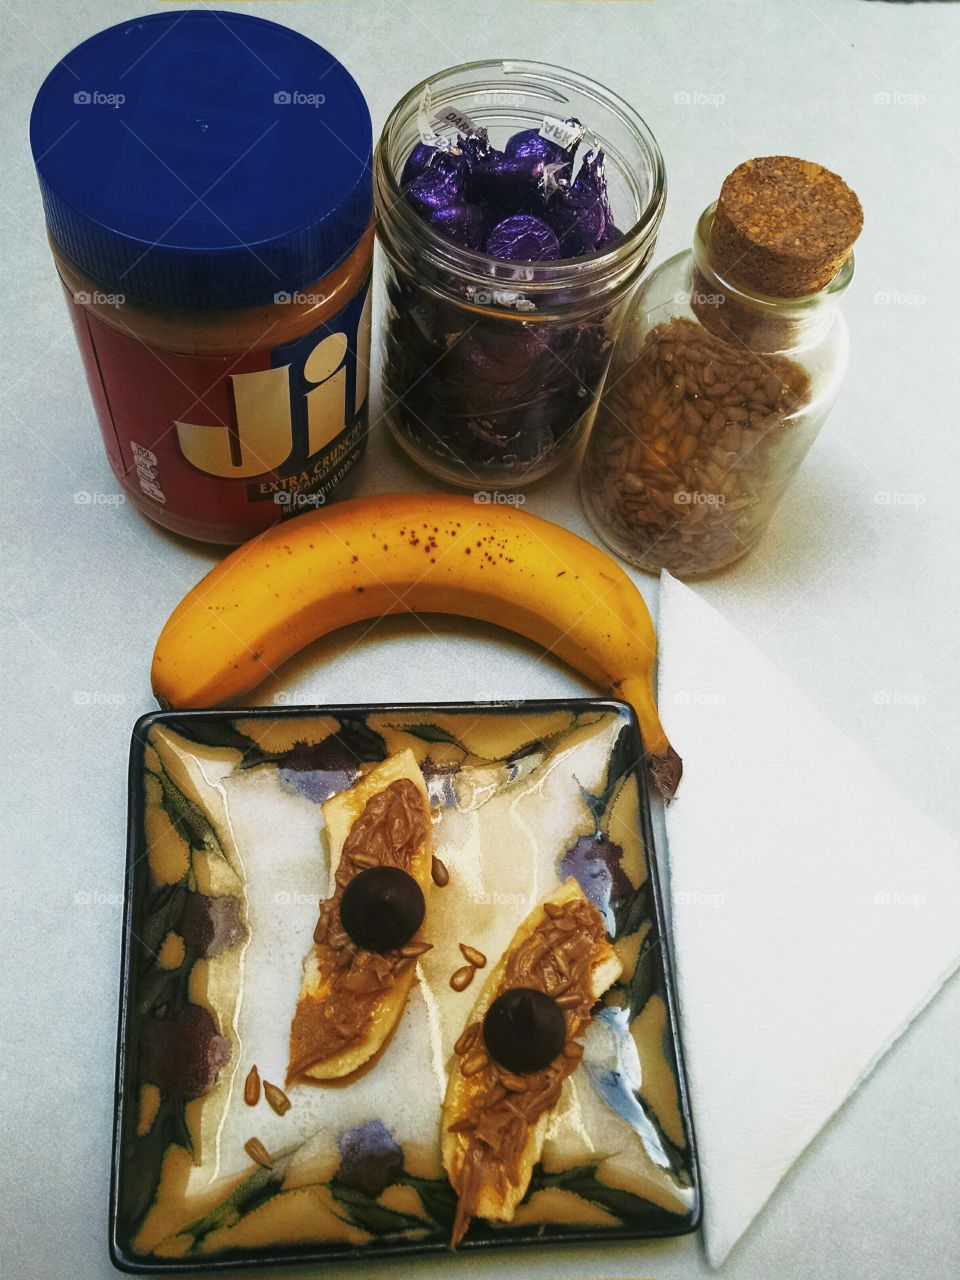 Not So Guilty Snack! Banana-Peanut butter- Dark Chocolate Kiss- Roasted Sunflowers